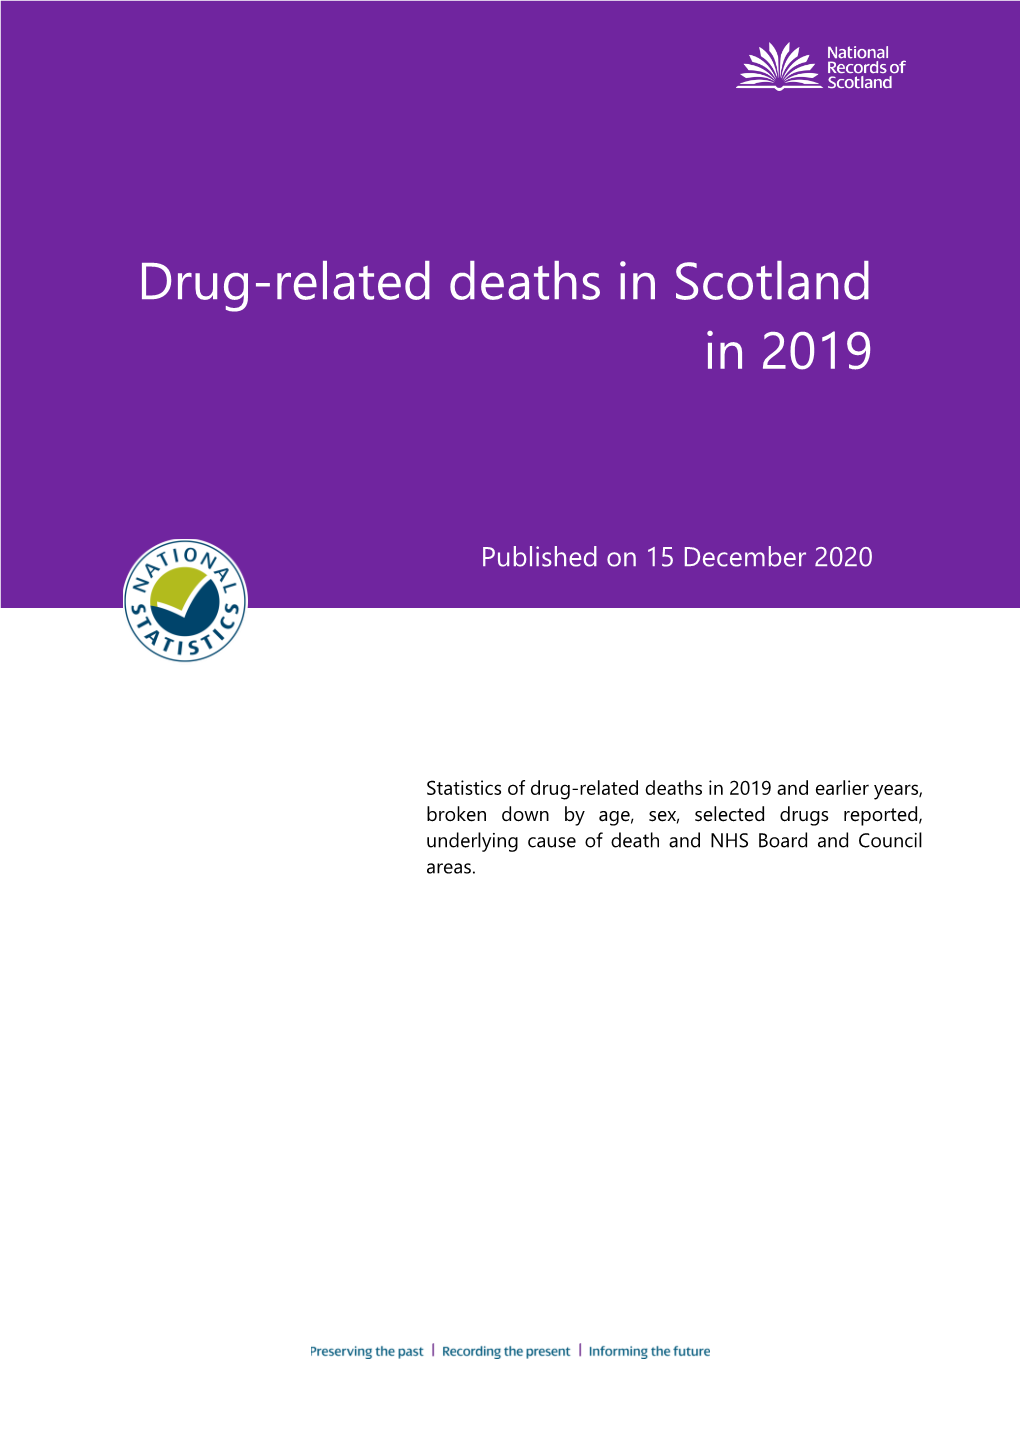 Drug-Related Deaths in Scotland in 2019